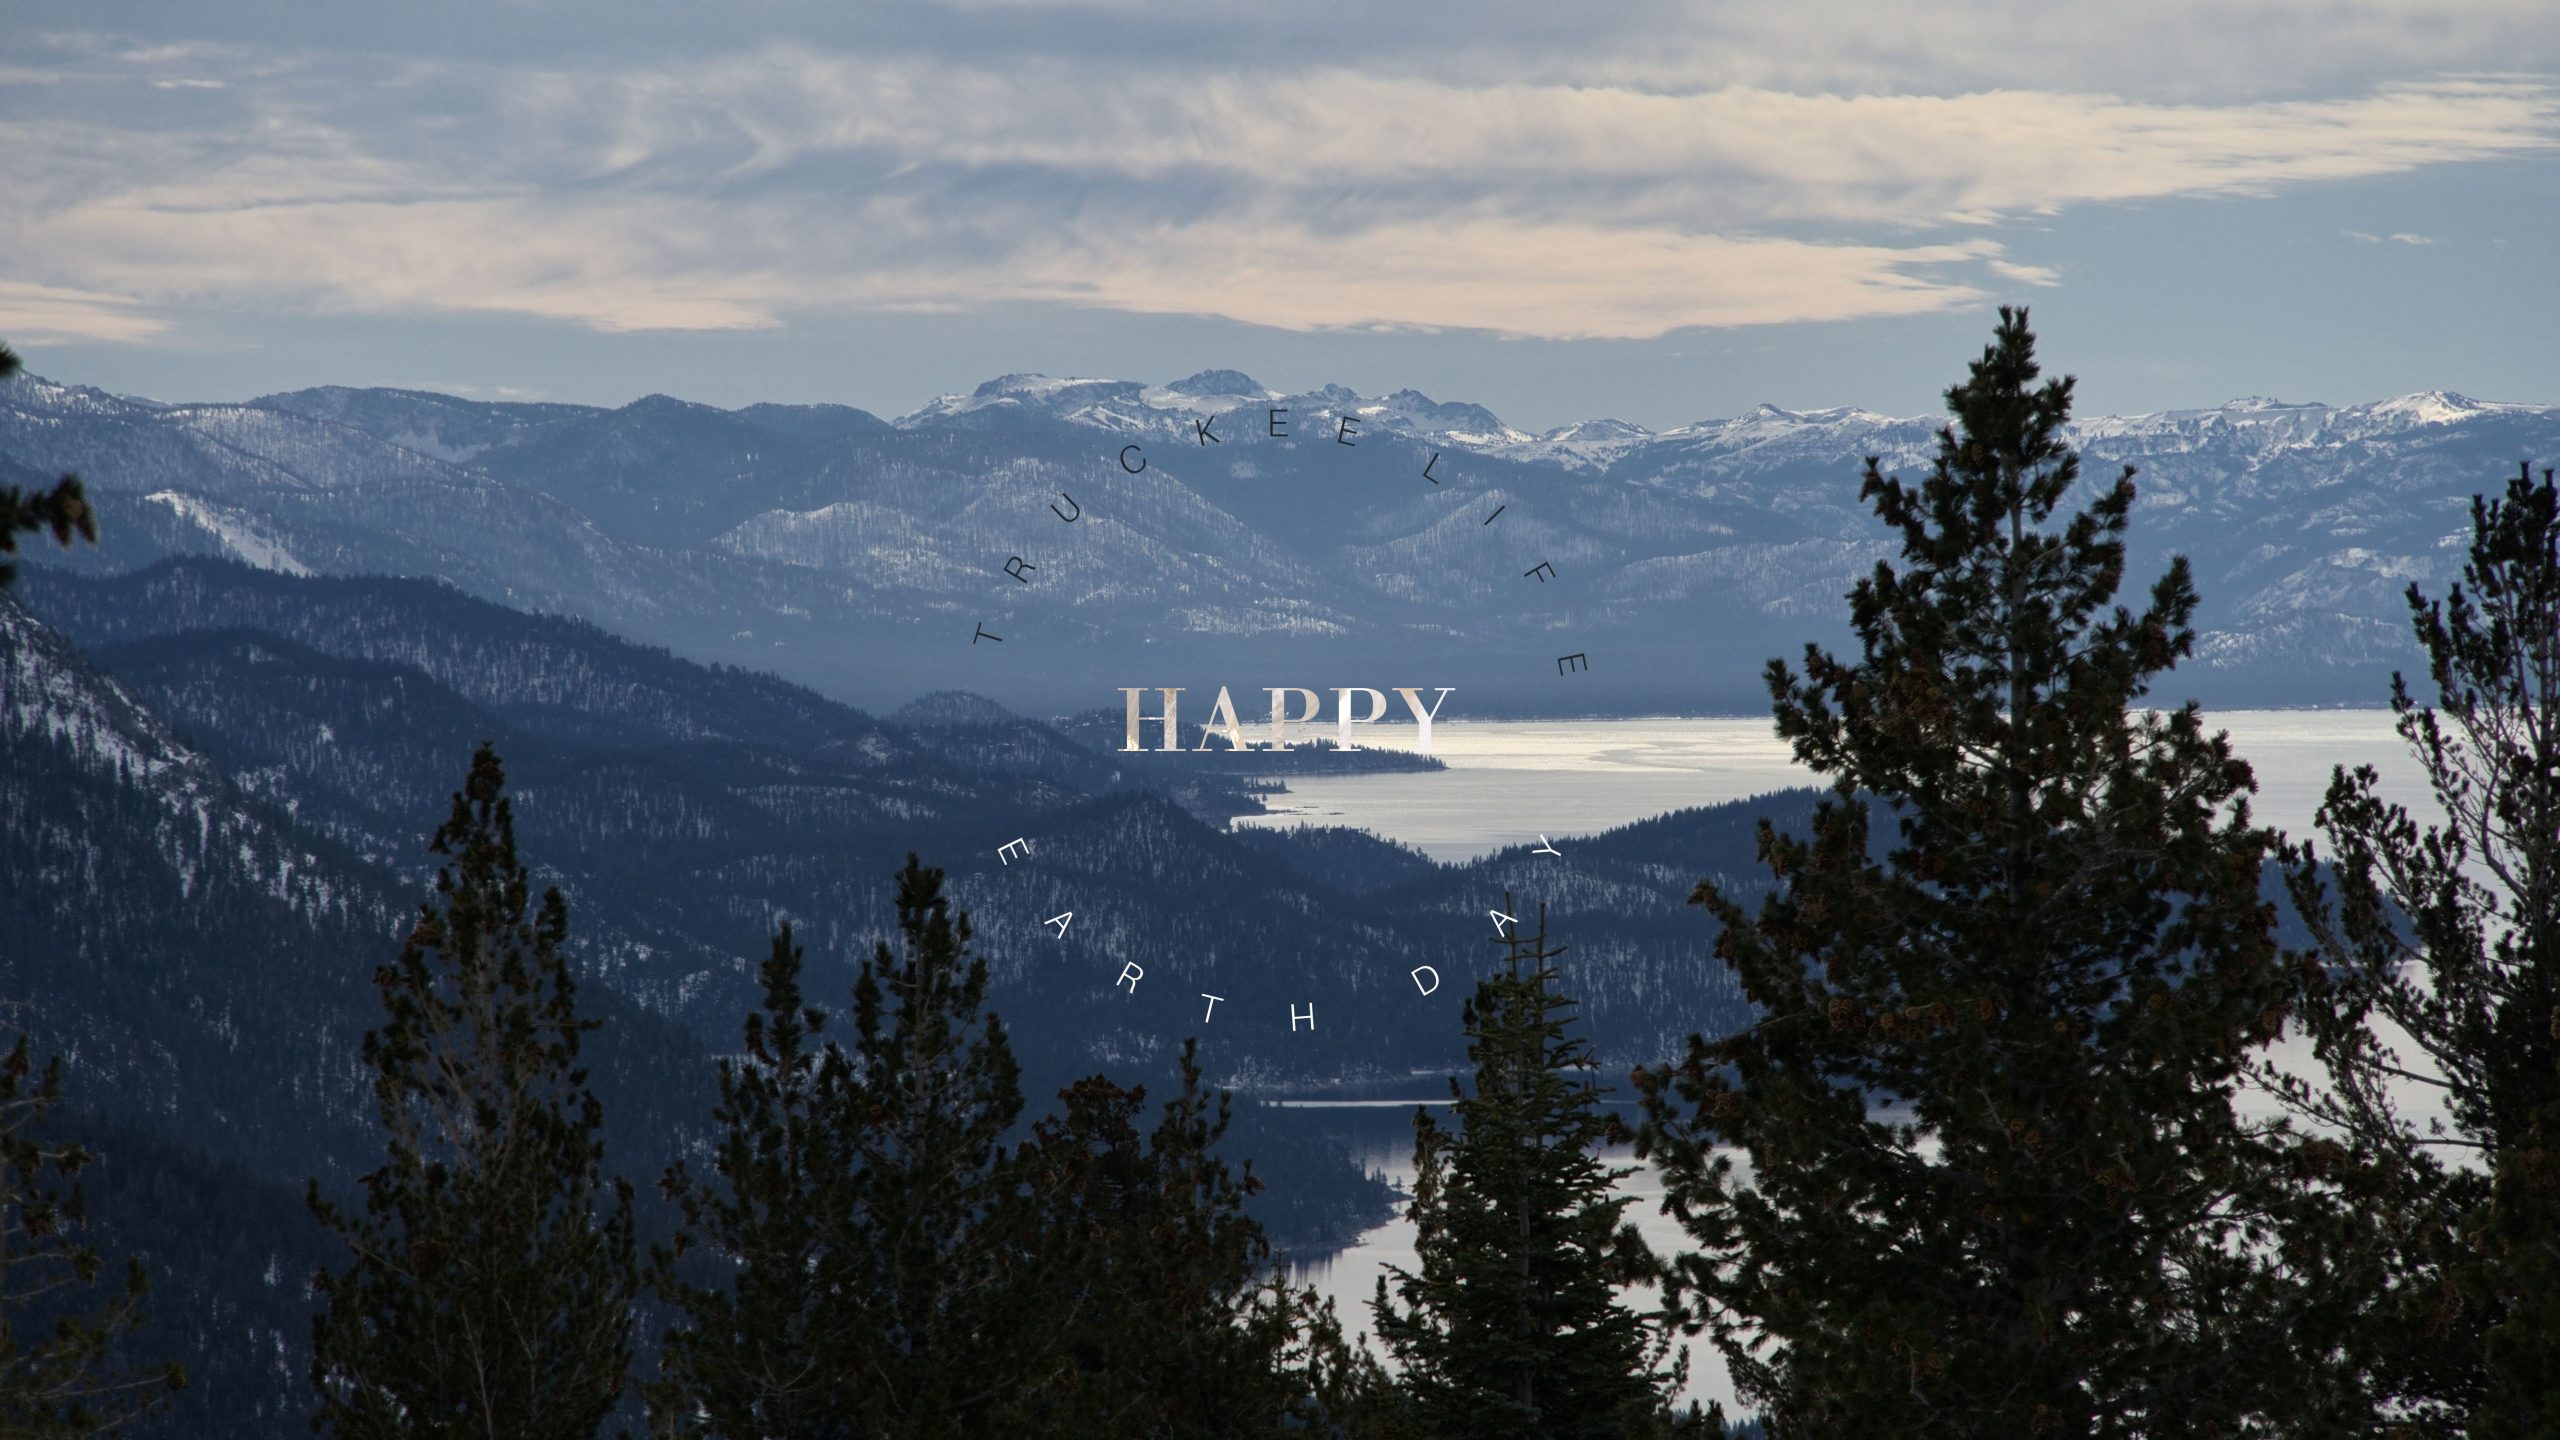 Featured Image showing winter views of Lake Tahoe and the Sierras.